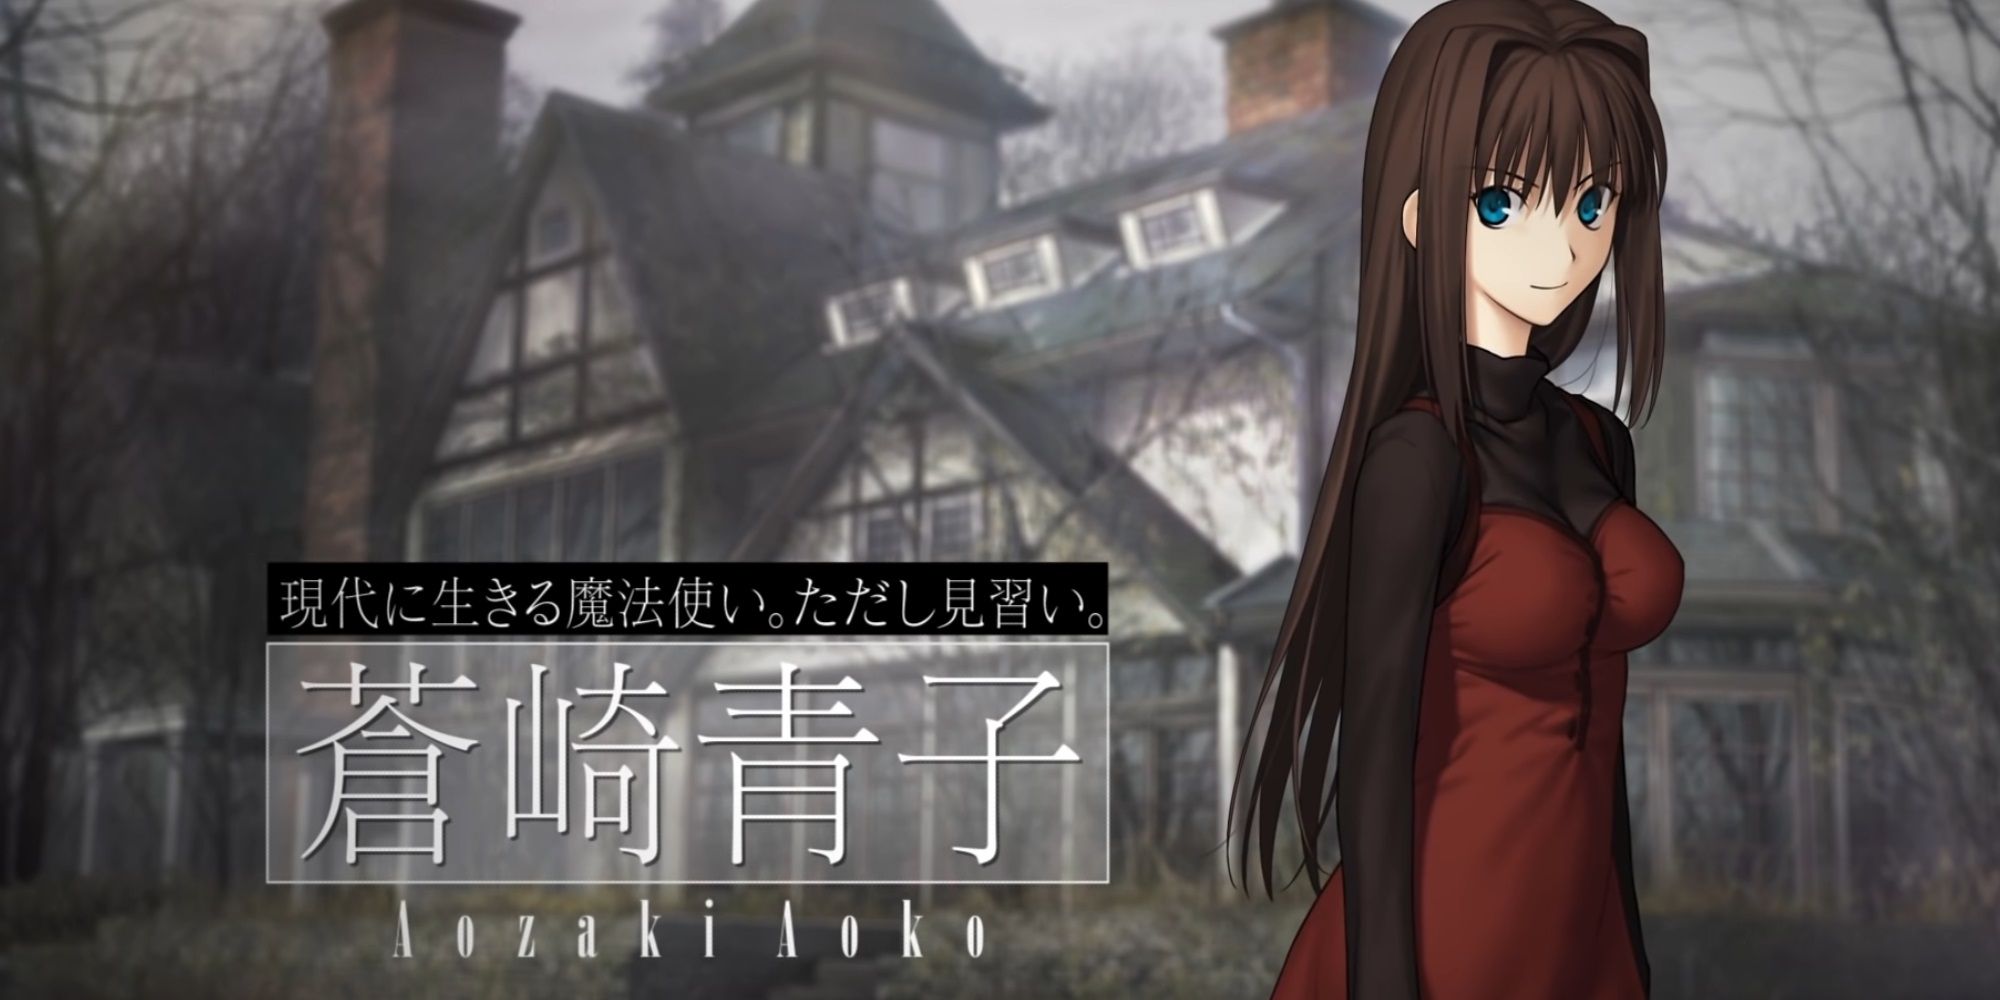 Mahoyo - An image of the main character, Aozaki Aoko, with her name written to the left.